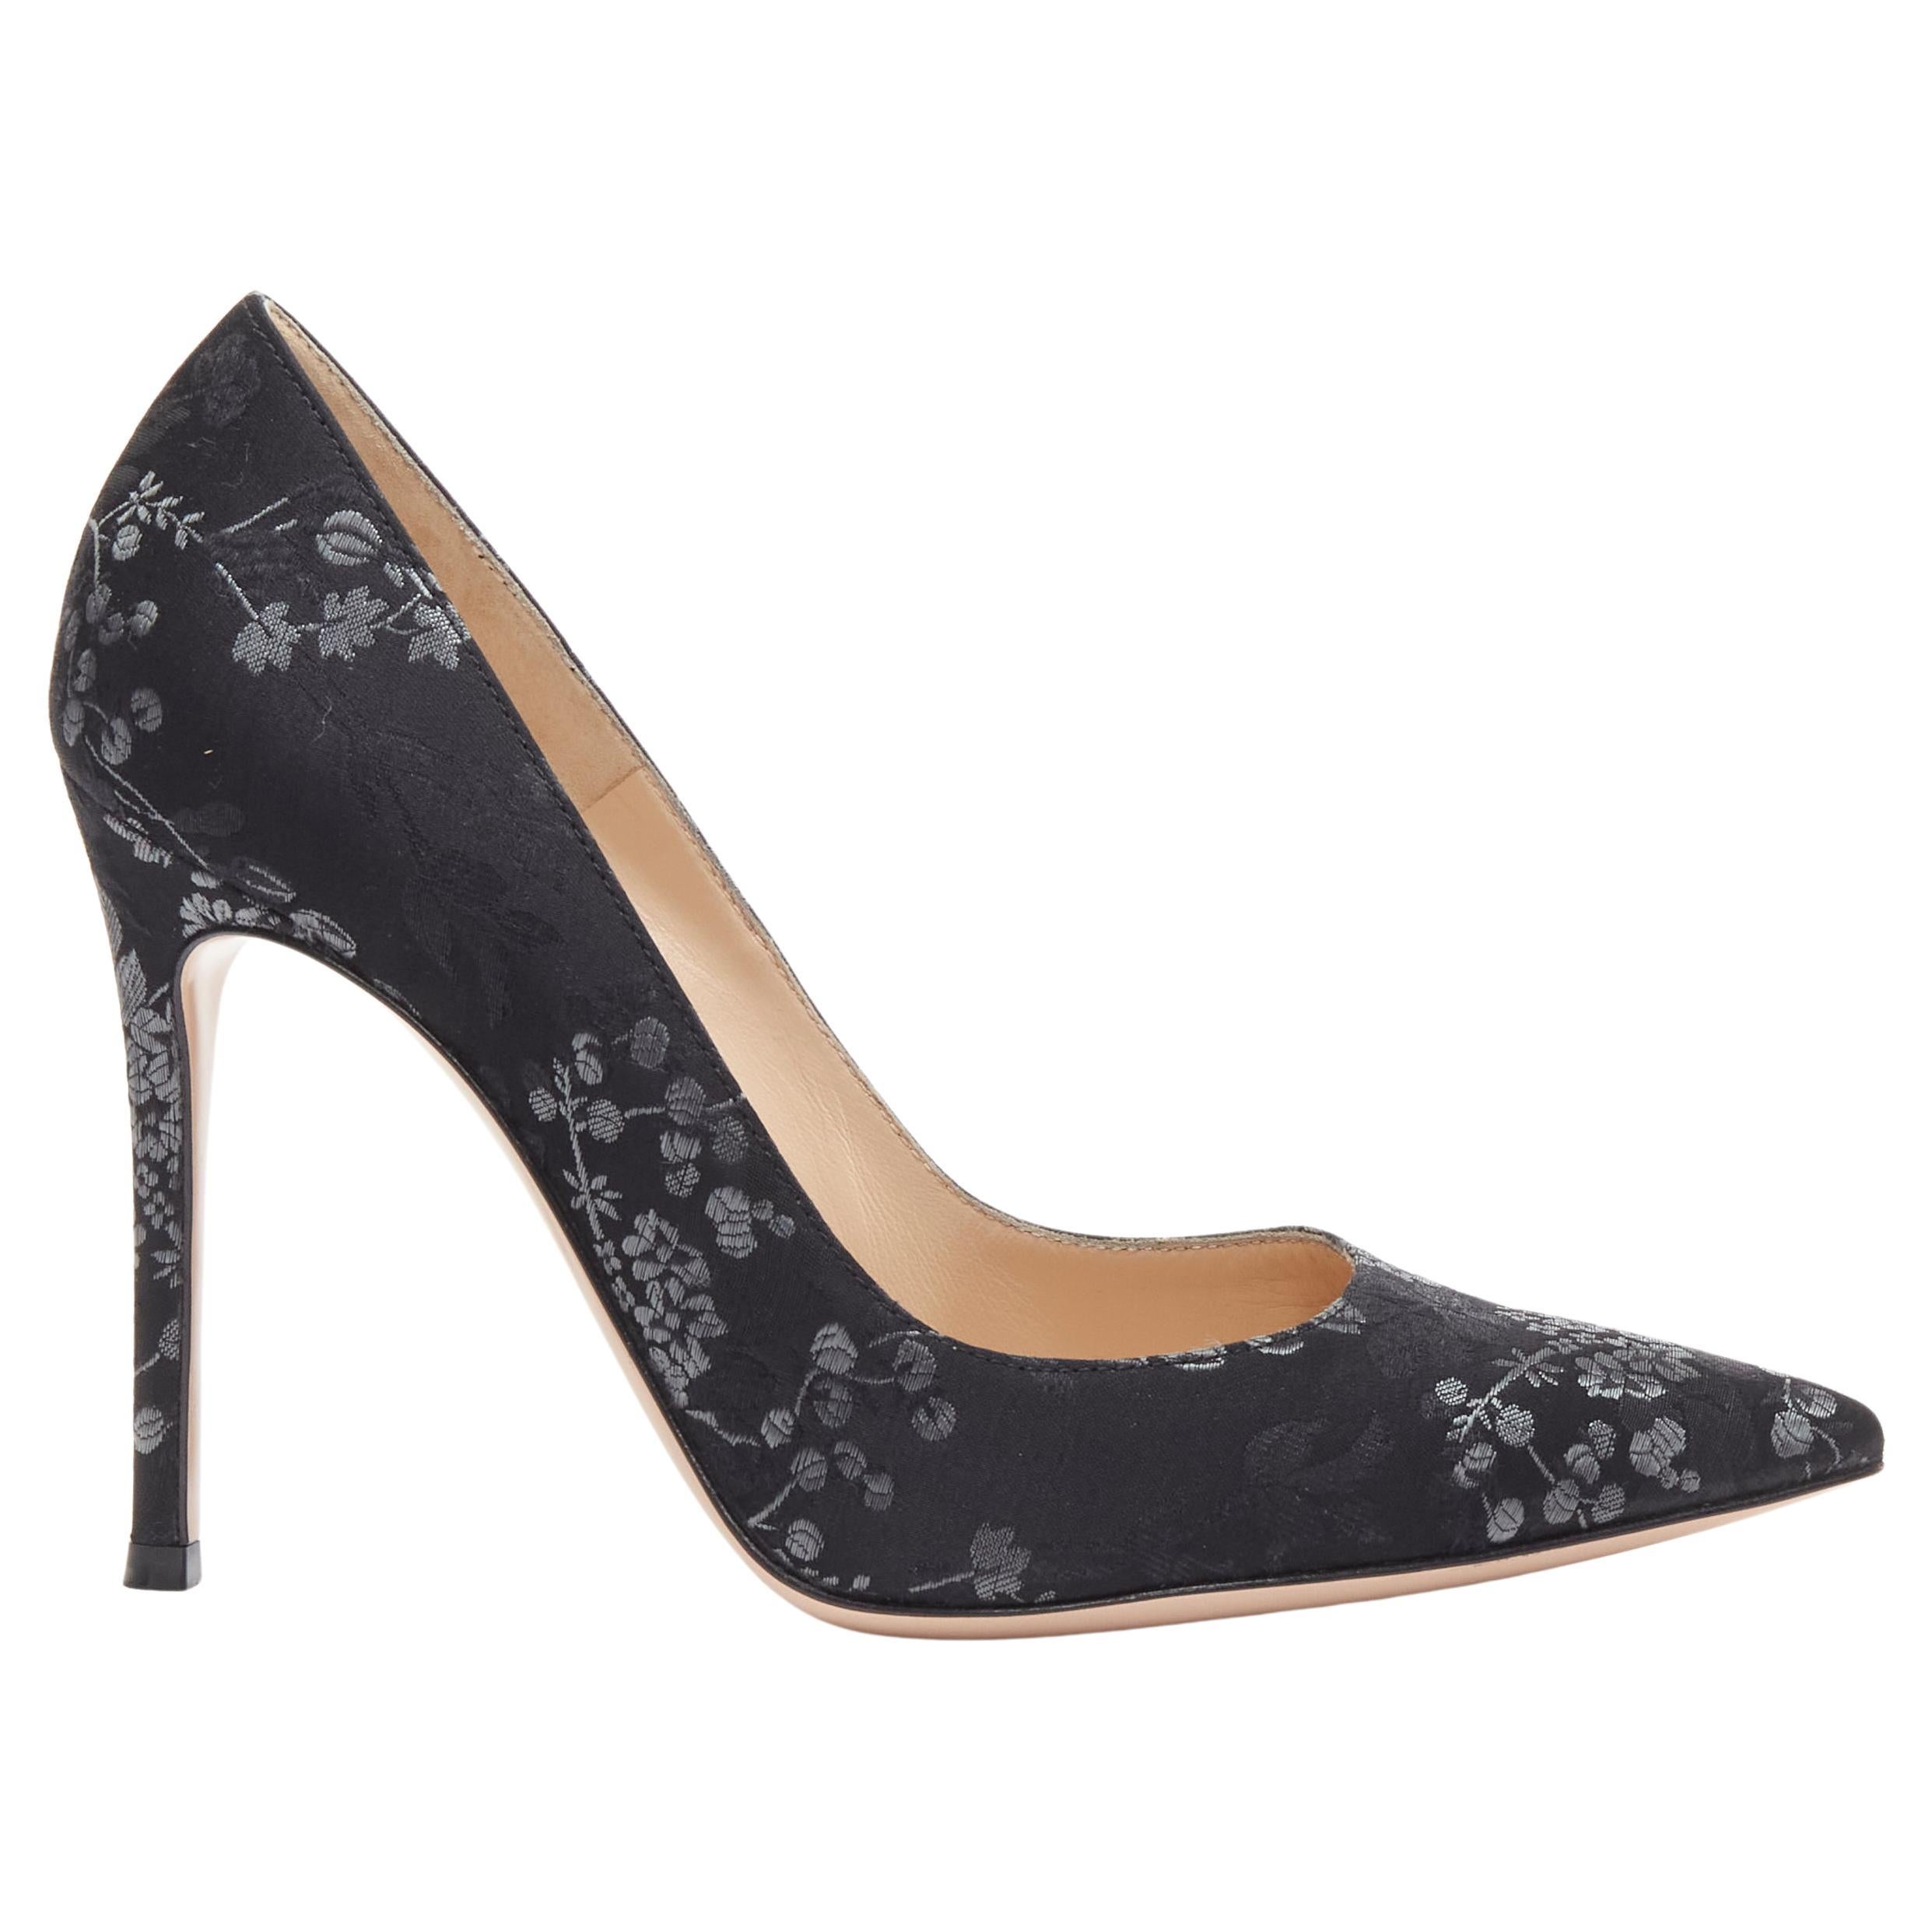 GIANVITO ROSSI black grey floral jacquard classic pigalle pump heels EU37.5 For Sale